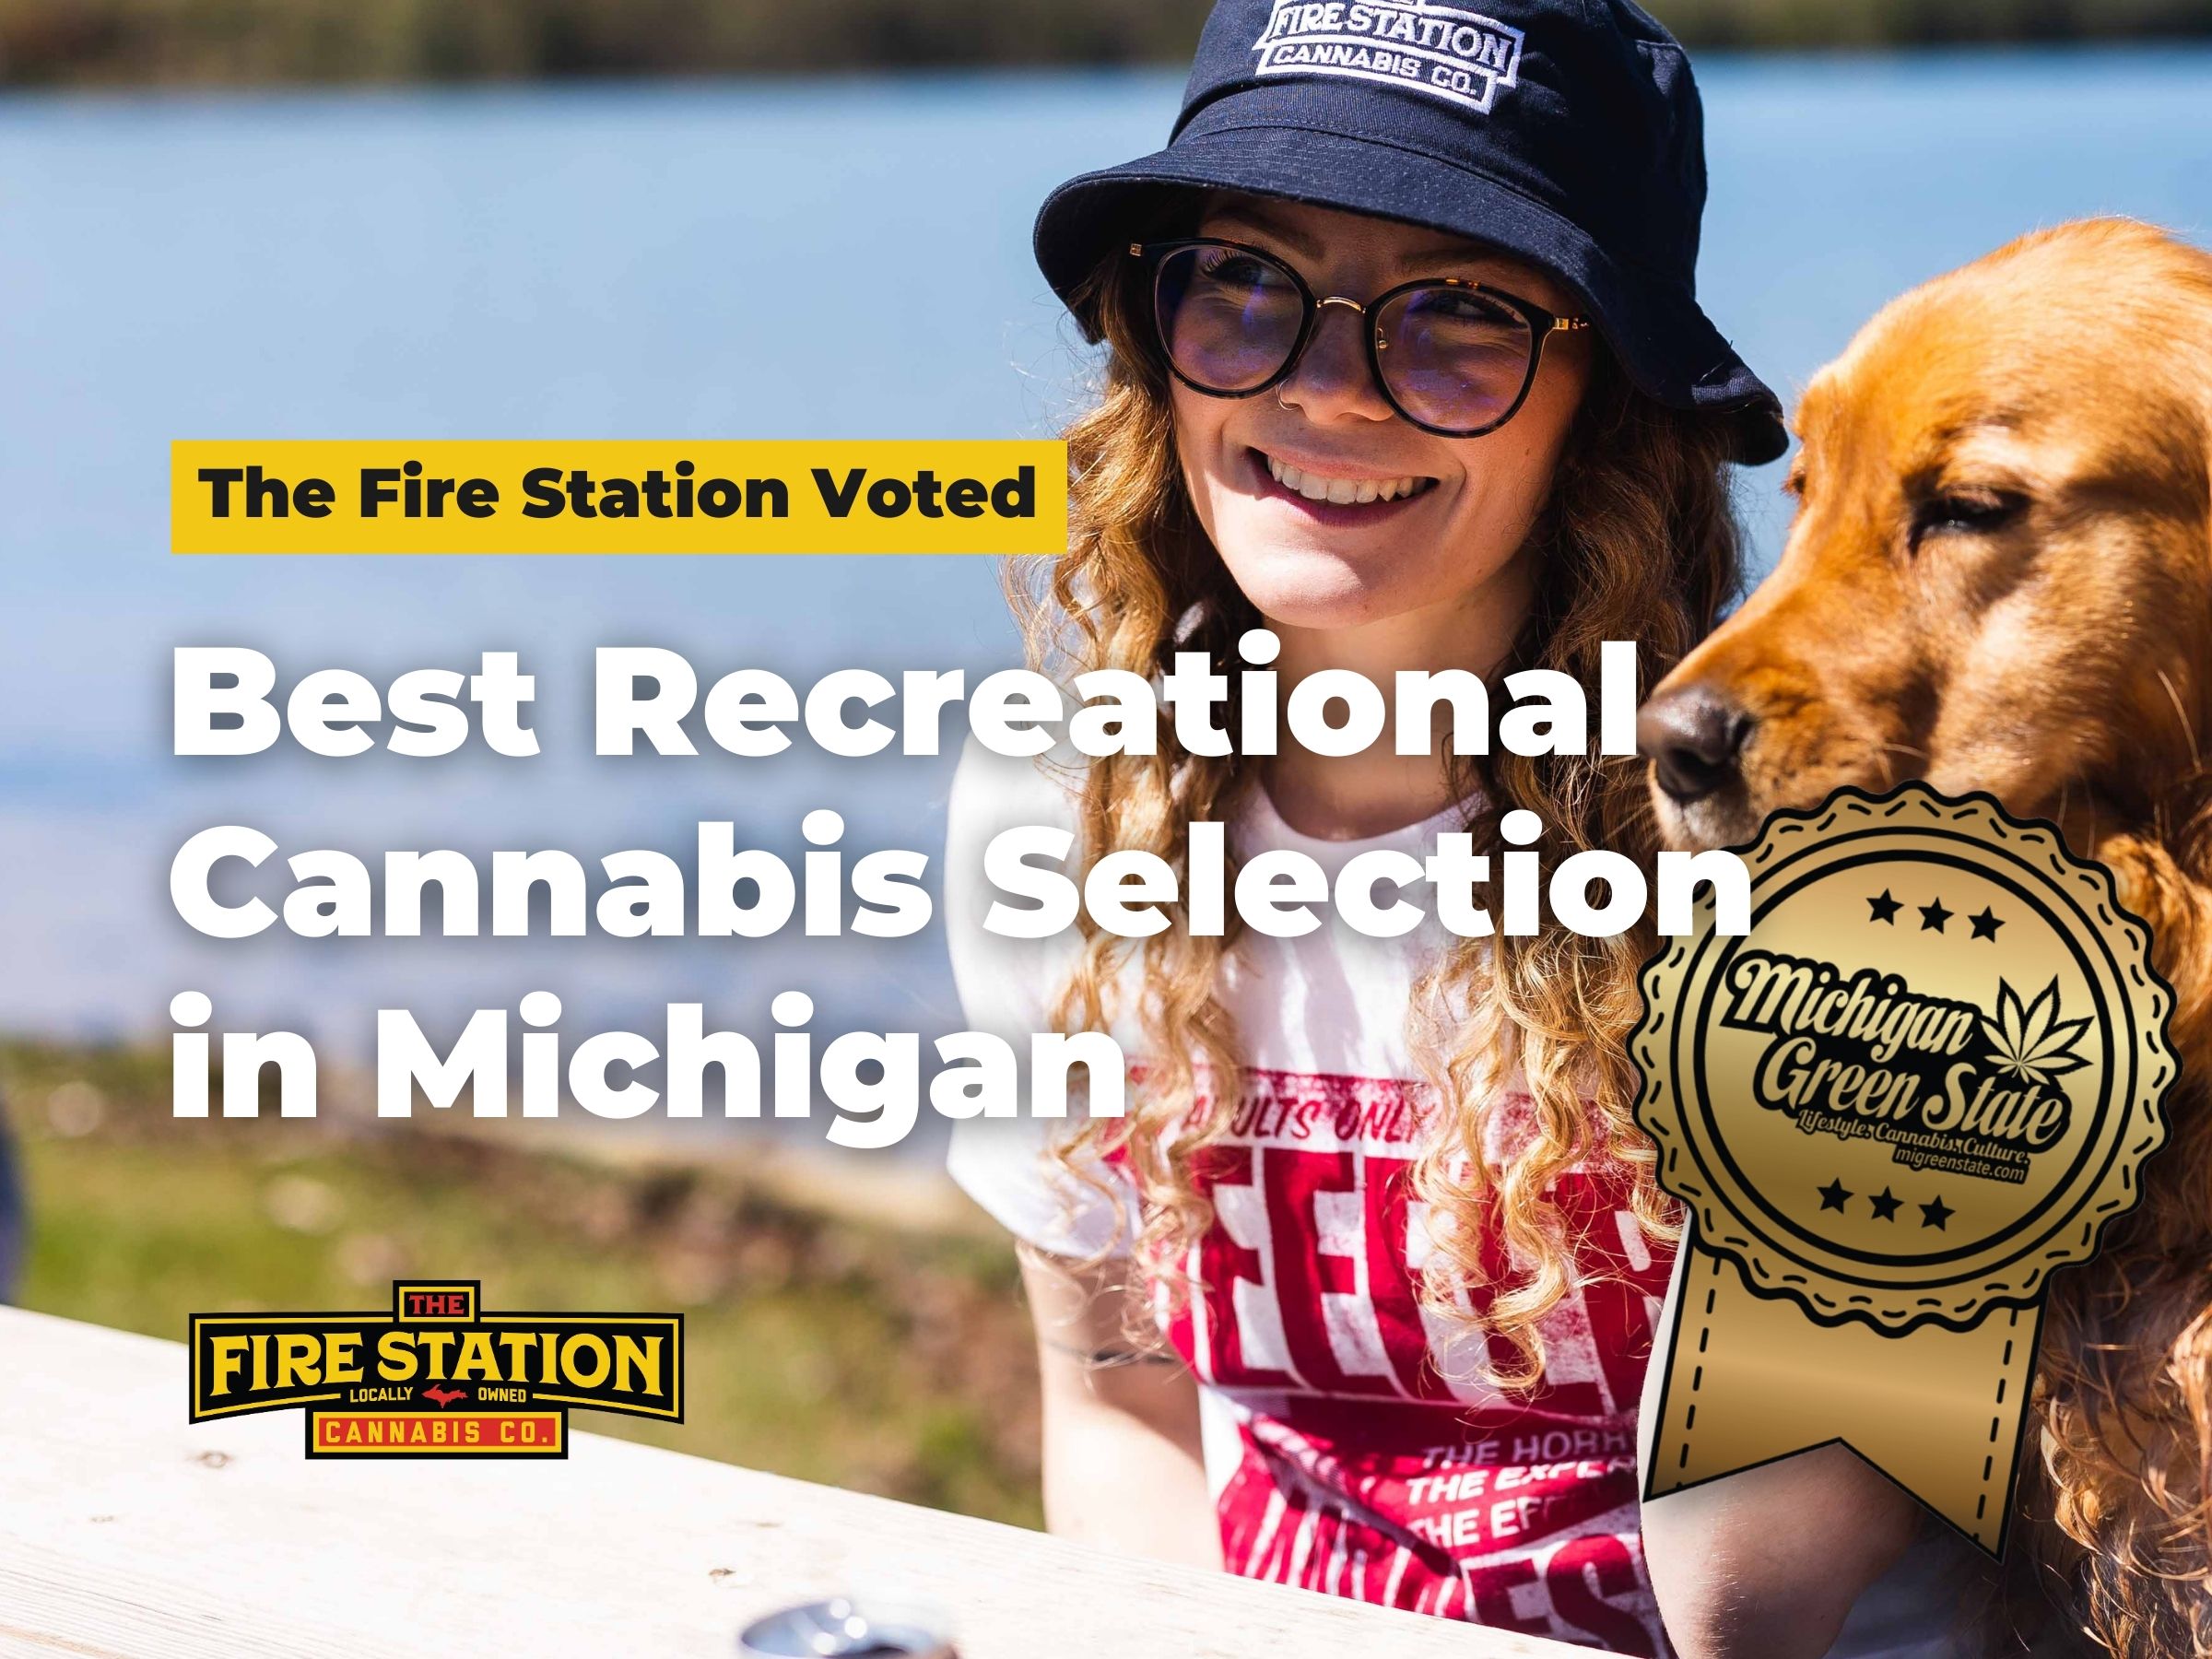 The Fire Station Voted ‘Best Recreational Cannabis Selection' in Michigan